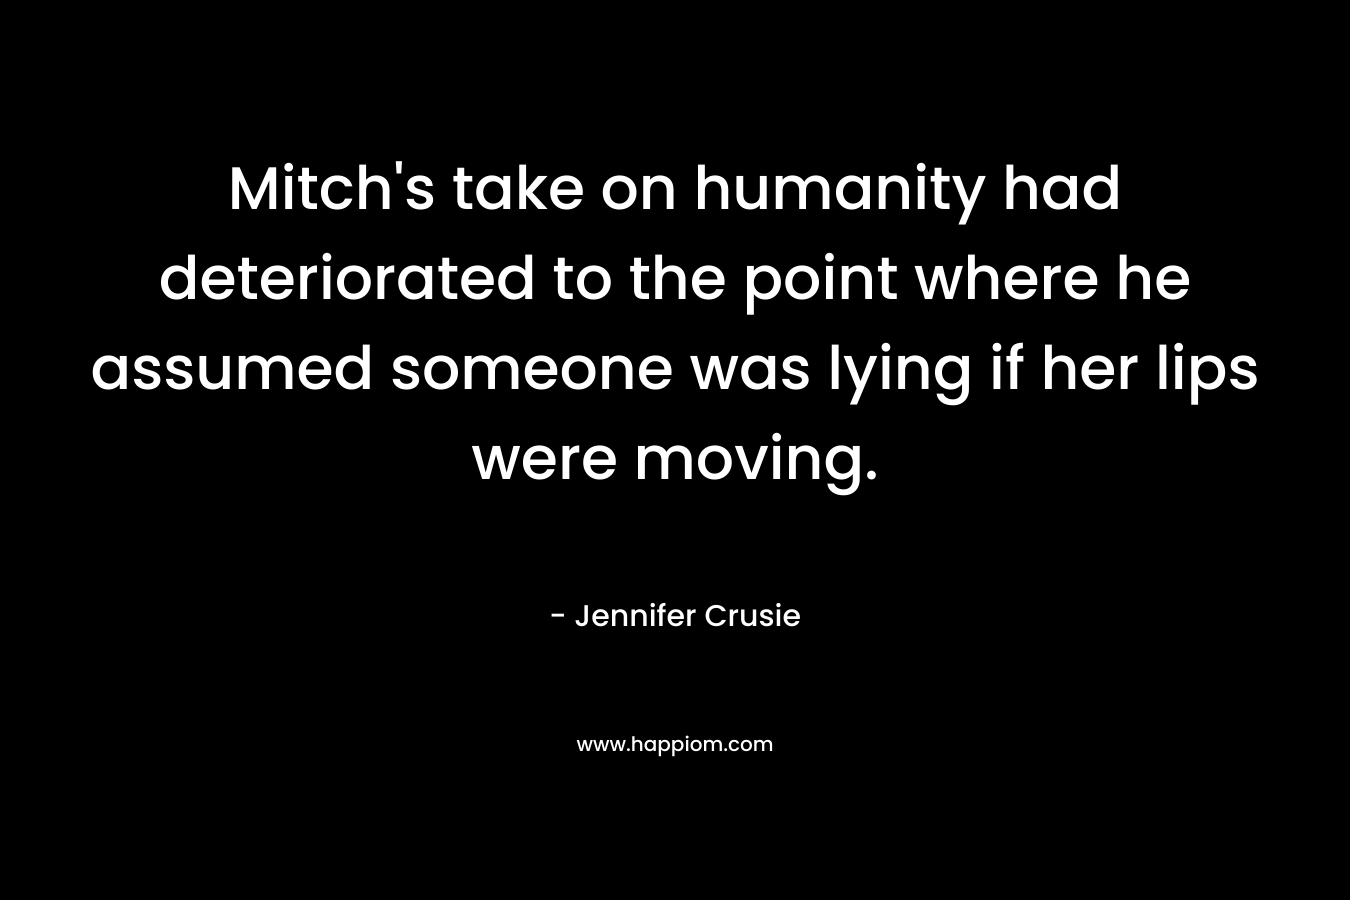 Mitch’s take on humanity had deteriorated to the point where he assumed someone was lying if her lips were moving. – Jennifer Crusie